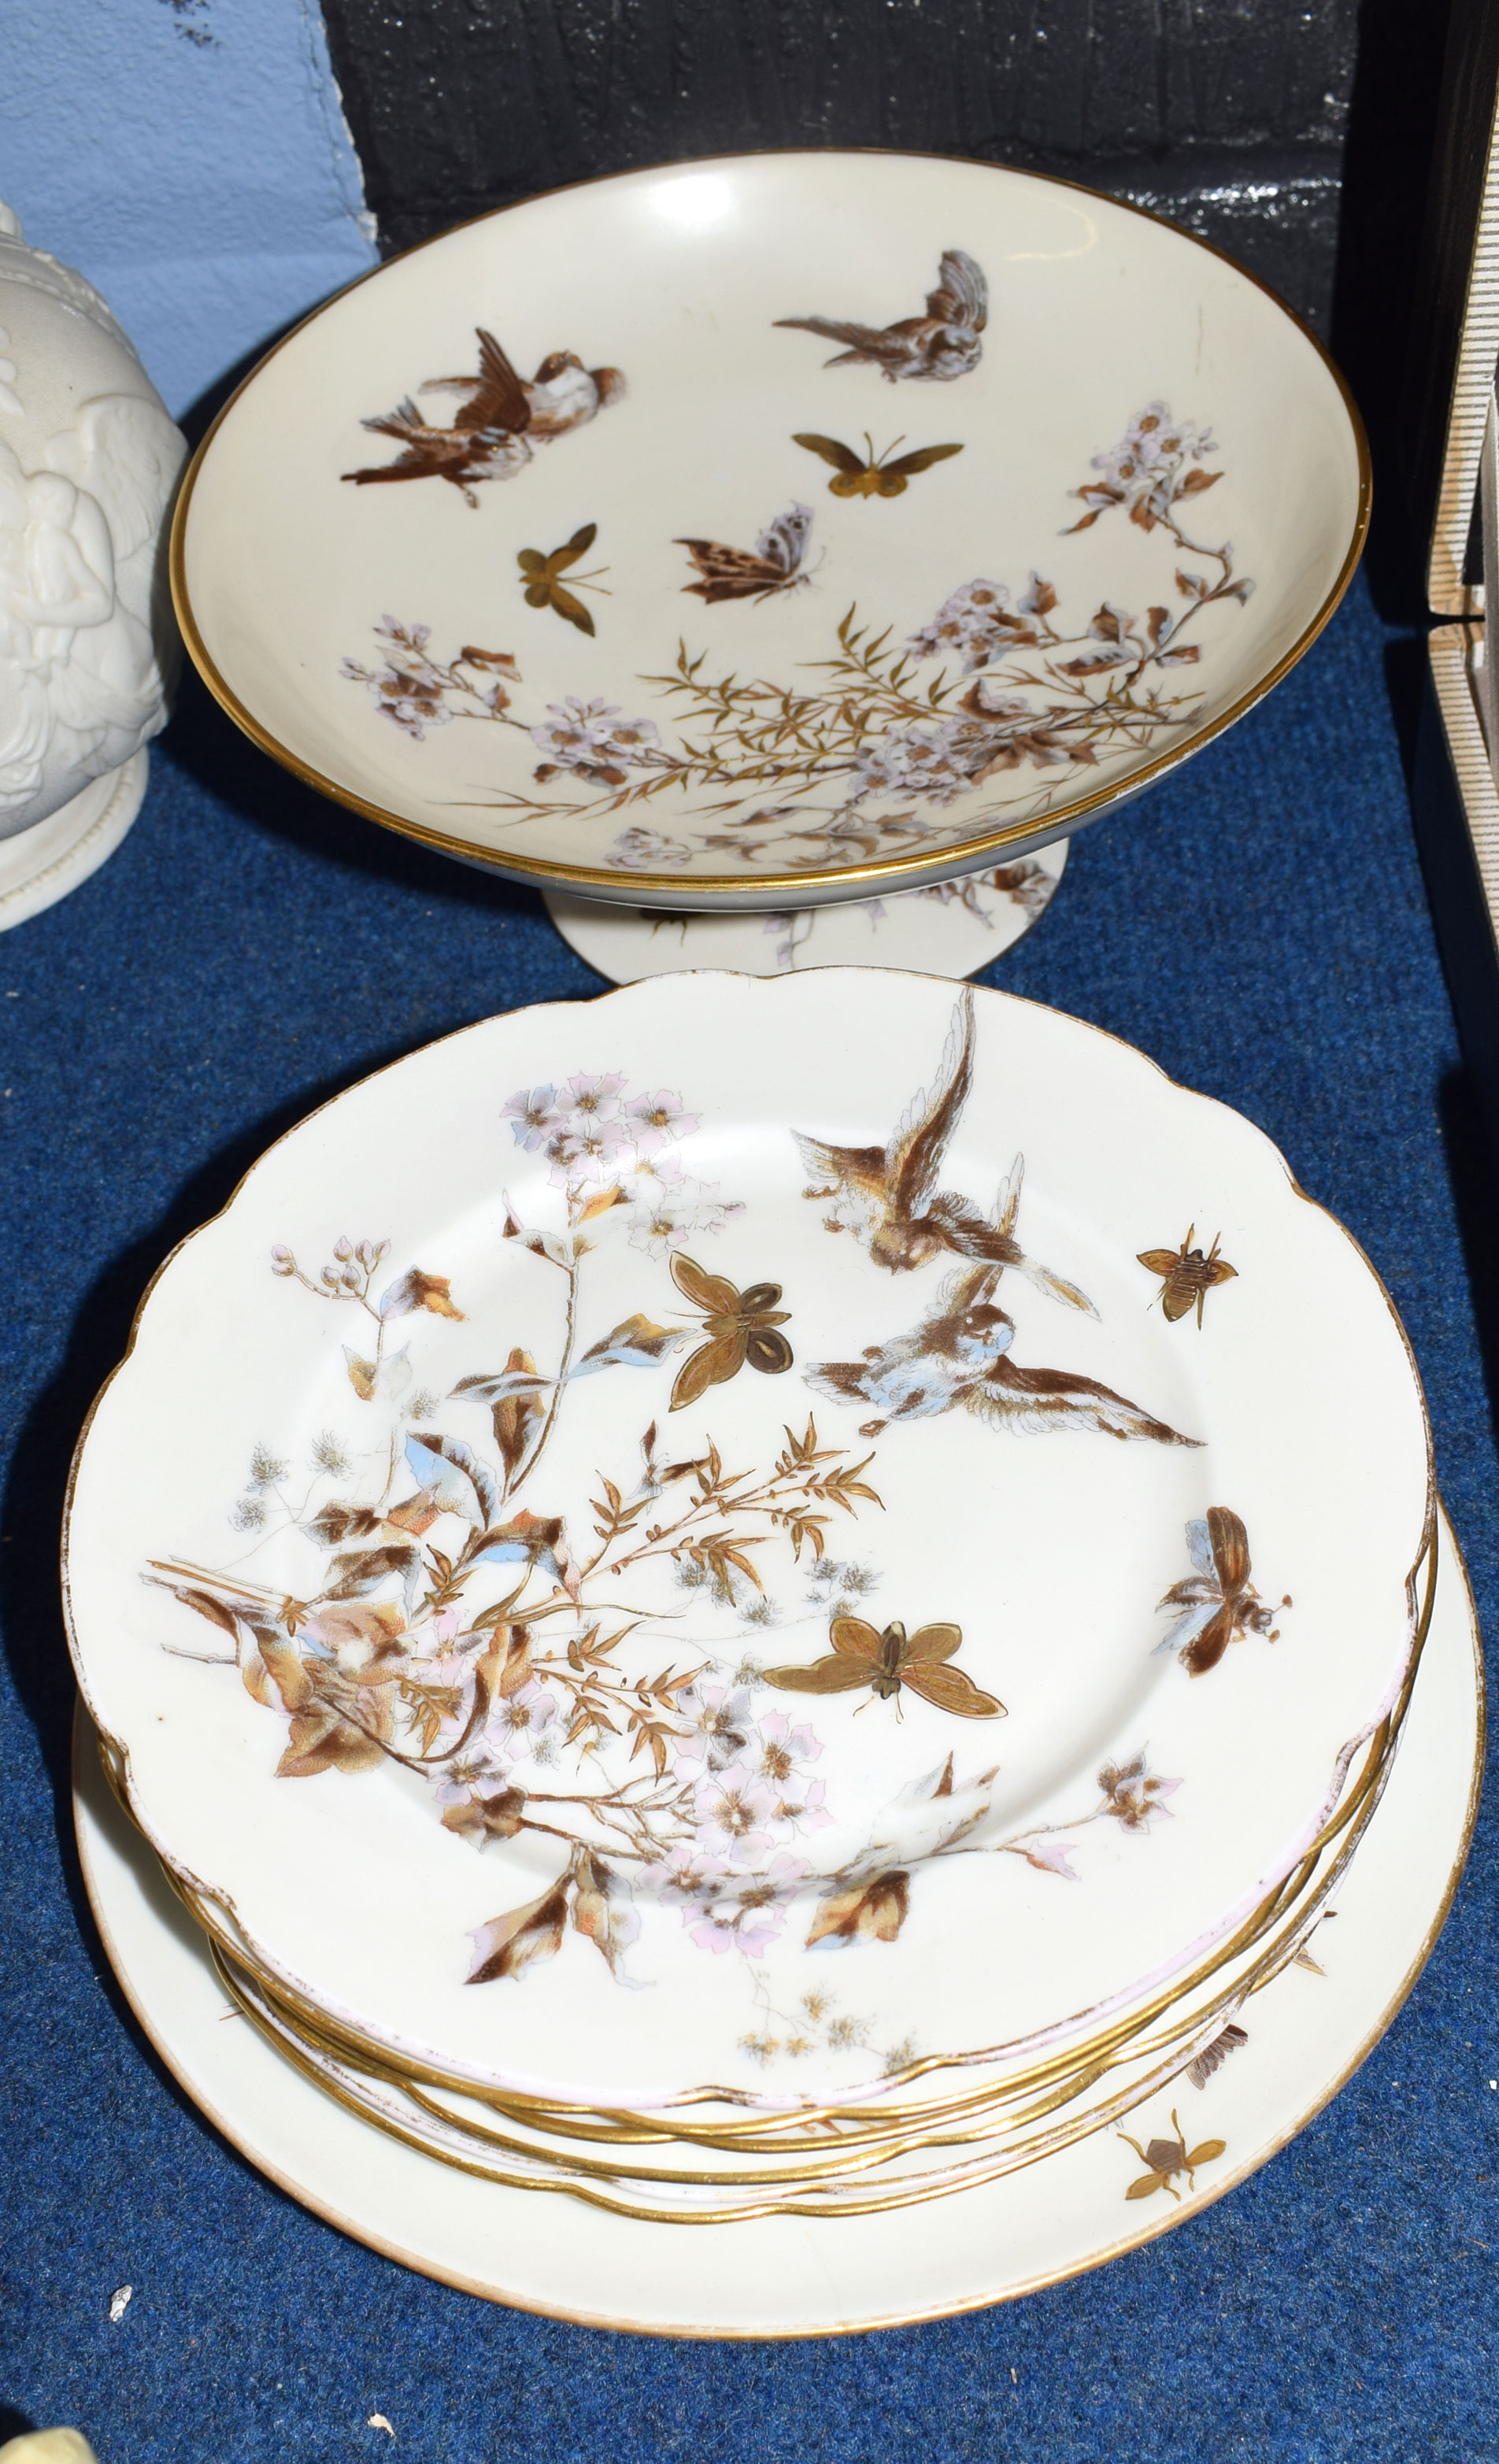 Group of Continental porcelain manufactured by Pirkenhammer, items include a tazza, six small plates